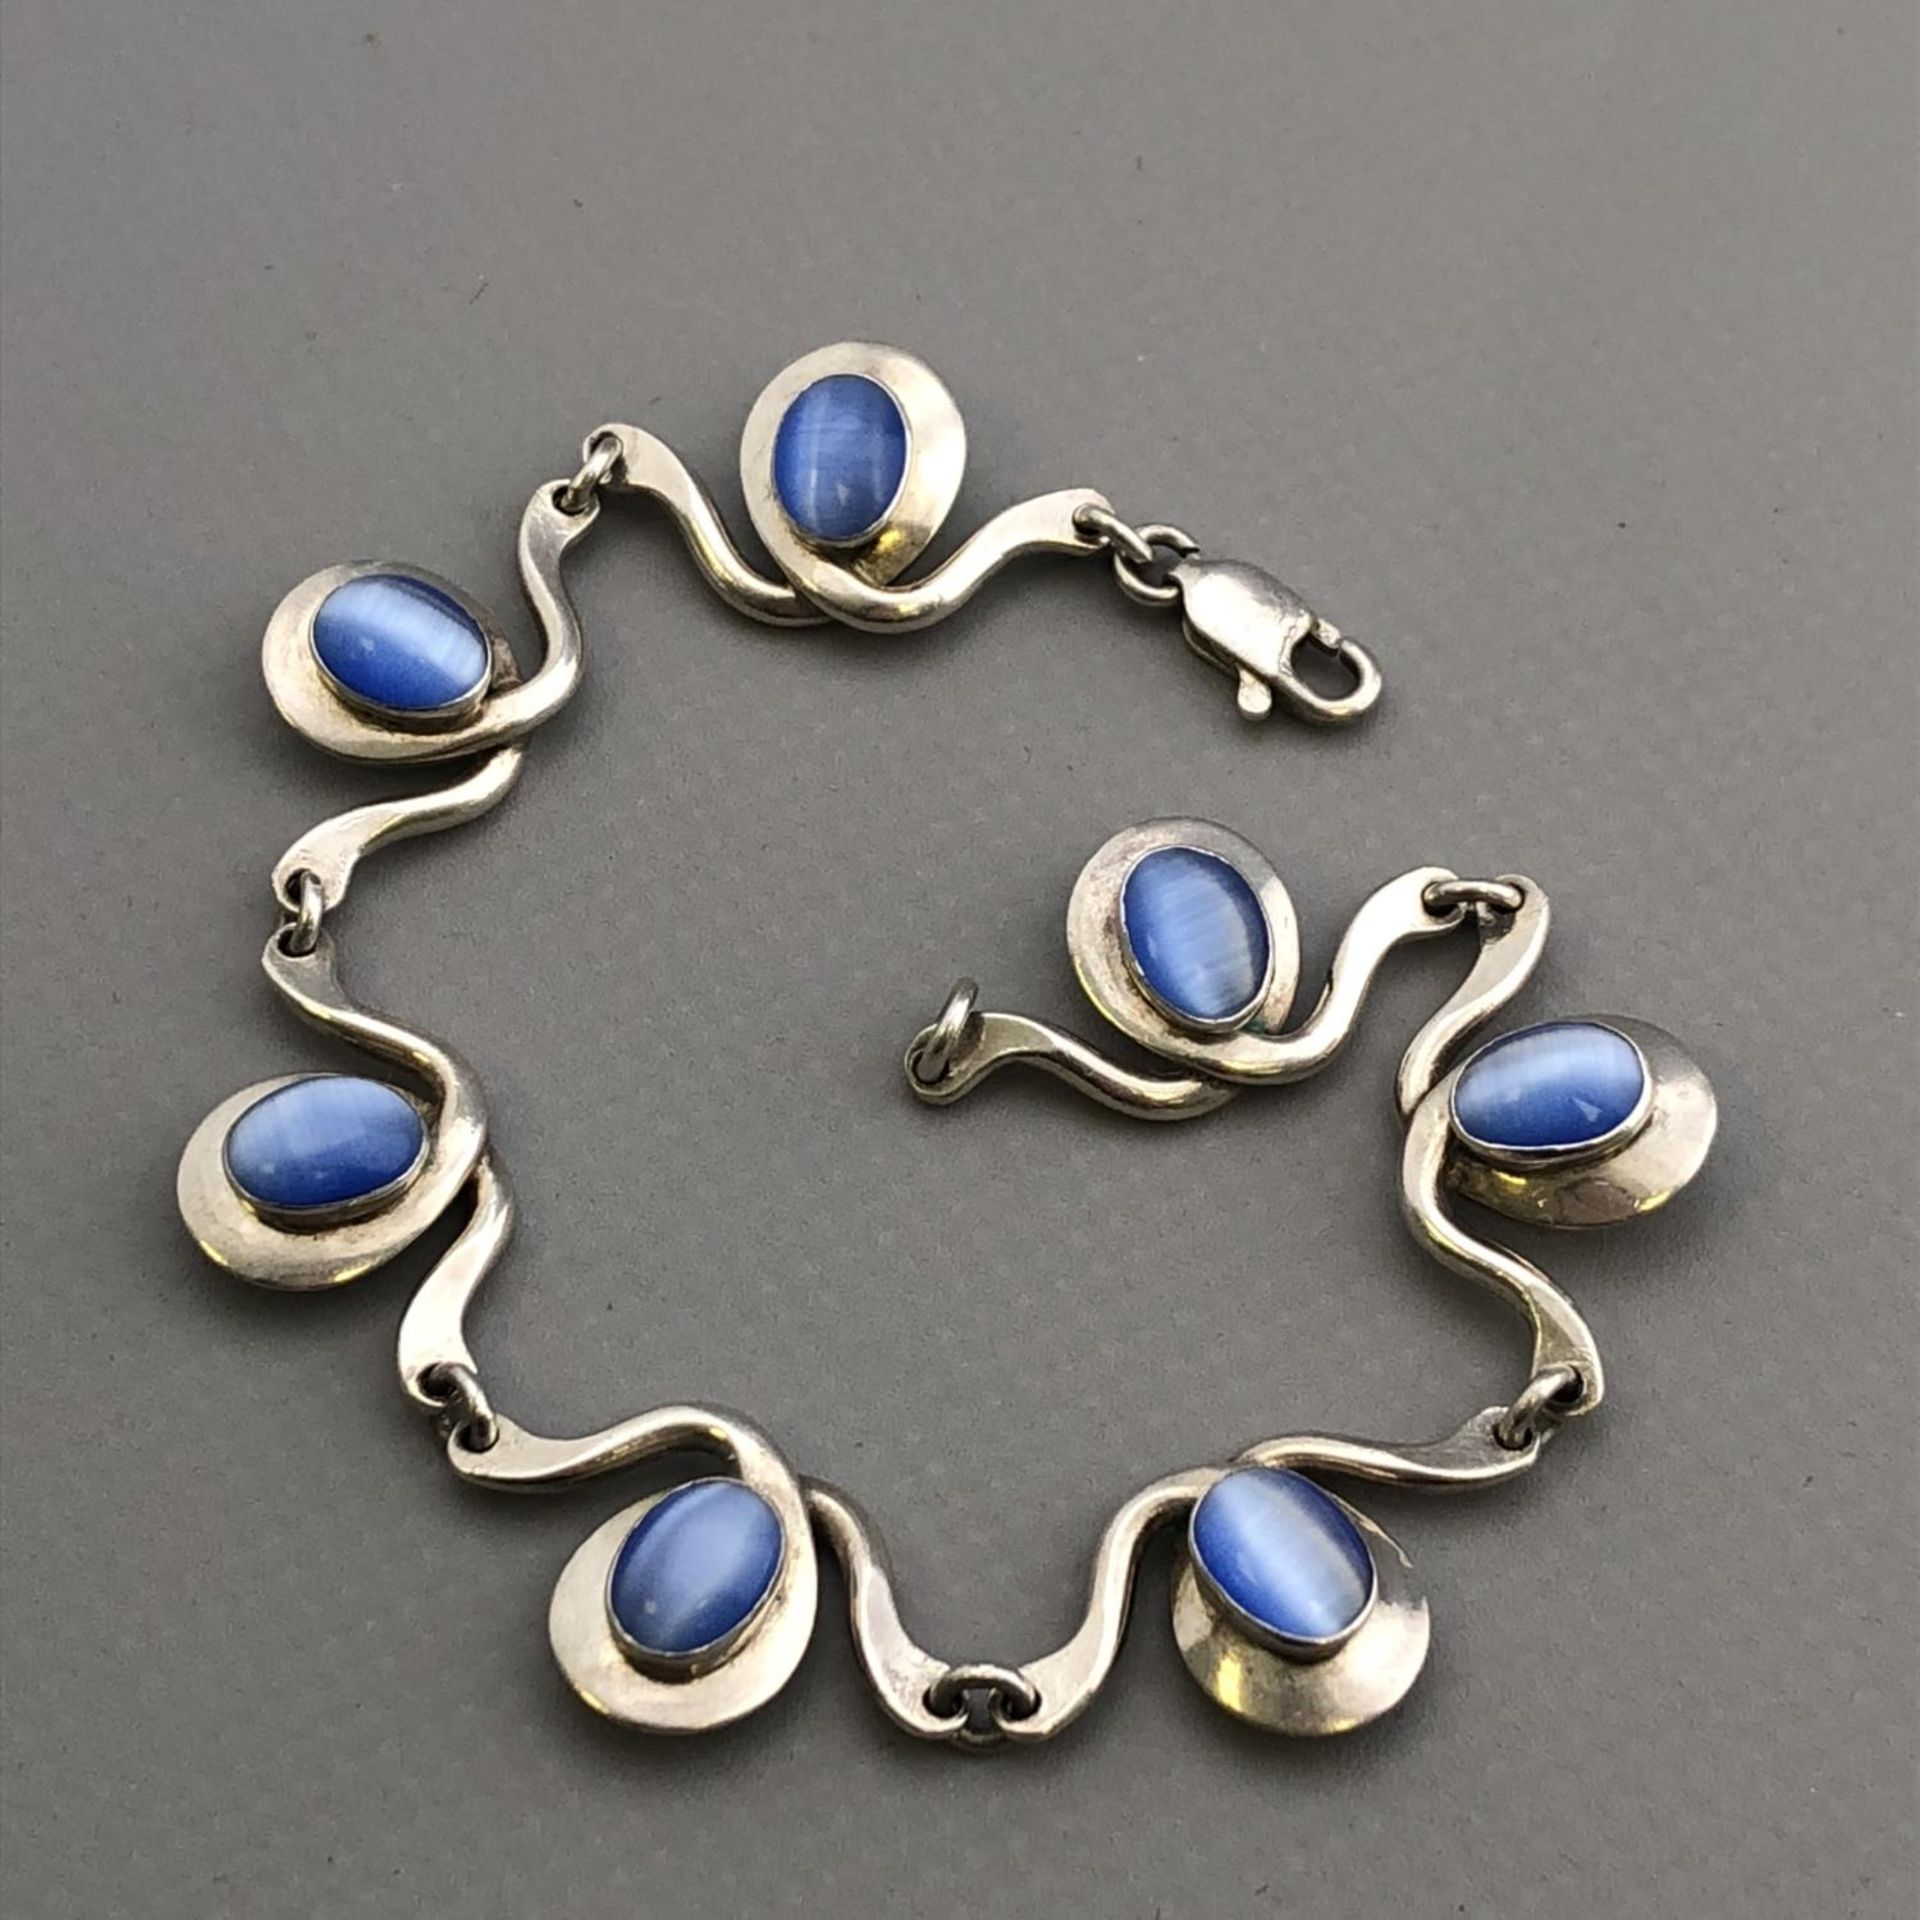 Sterling Silver and Blue Moon Stone Bracelet Each Link Stamped AK925S